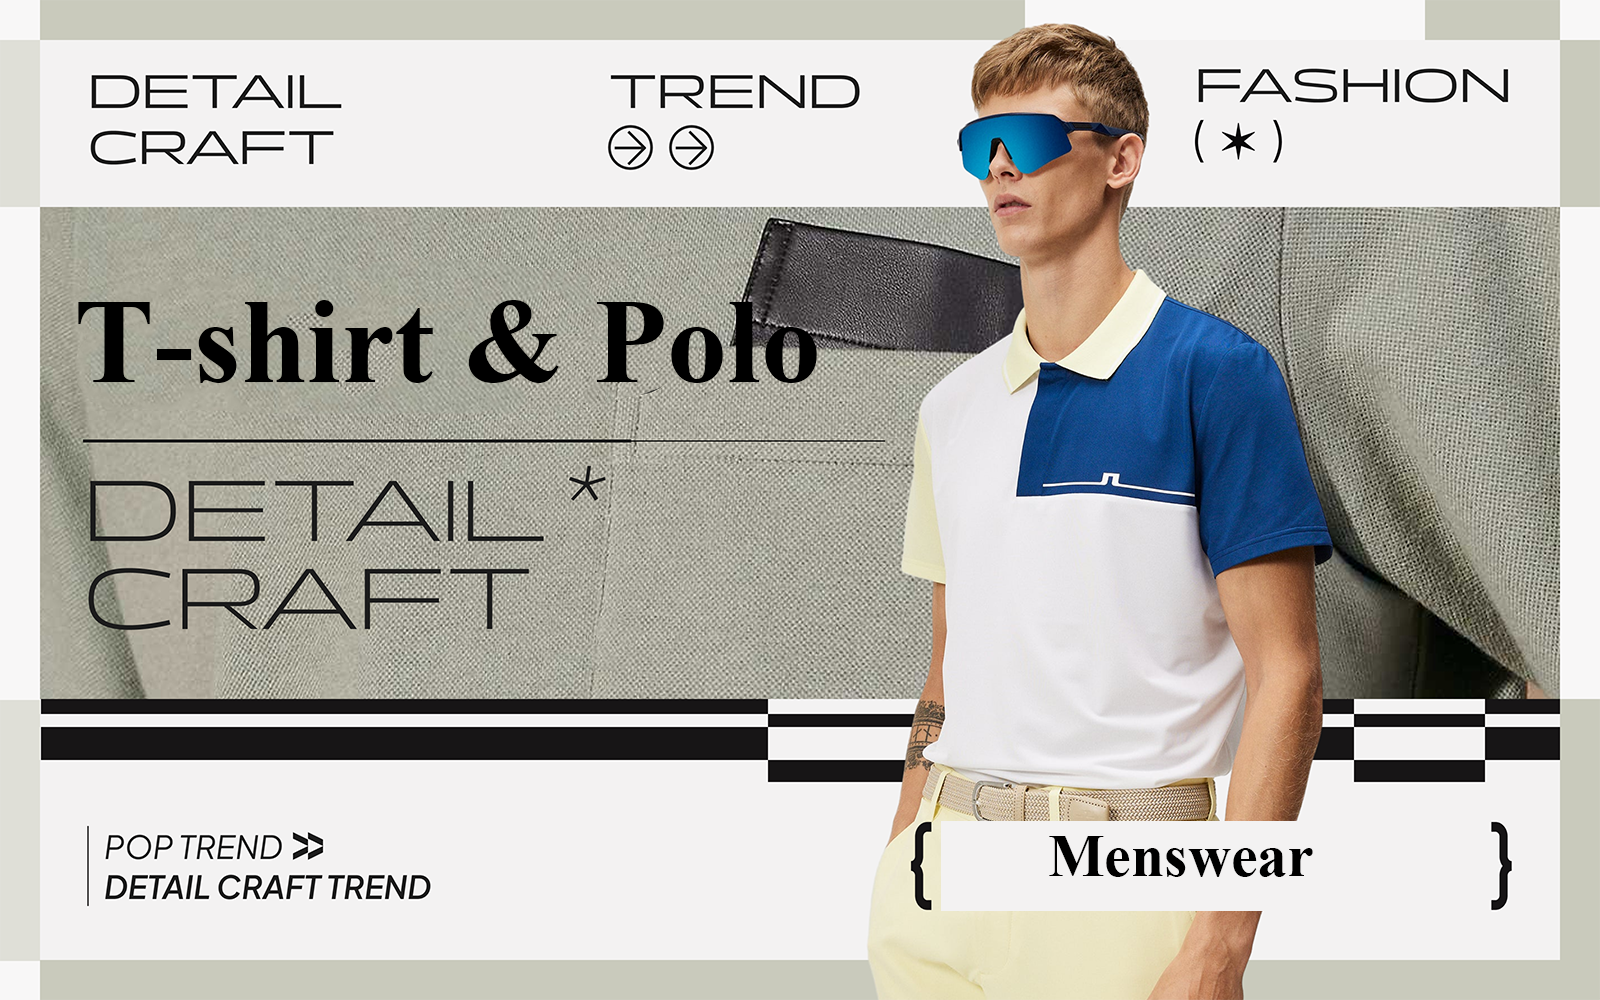 Business Casual -- The Detail & Craft Trend for Men's T-shirt & Polo